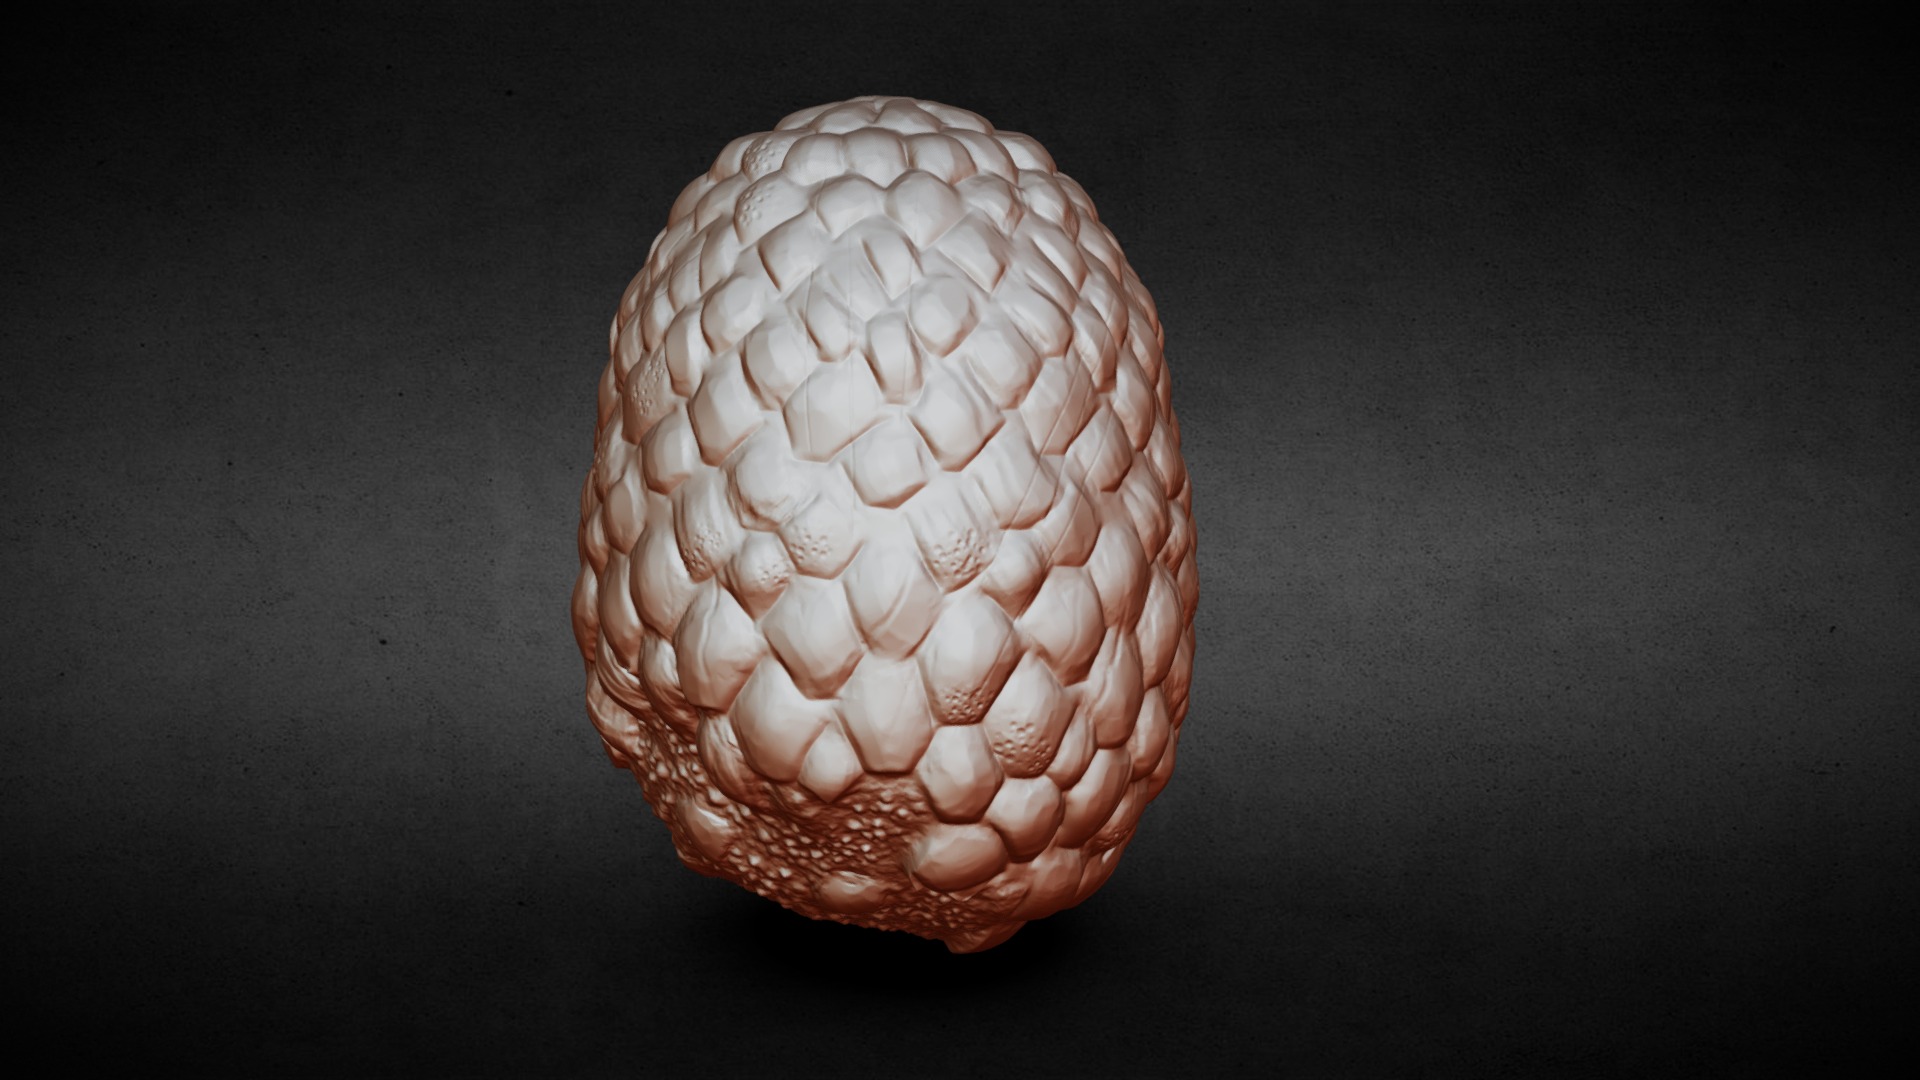 3D model Day 27 Dragon Egg #Sculptjanuary19 - This is a 3D model of the Day 27 Dragon Egg #Sculptjanuary19. The 3D model is about a close up of a pine cone.